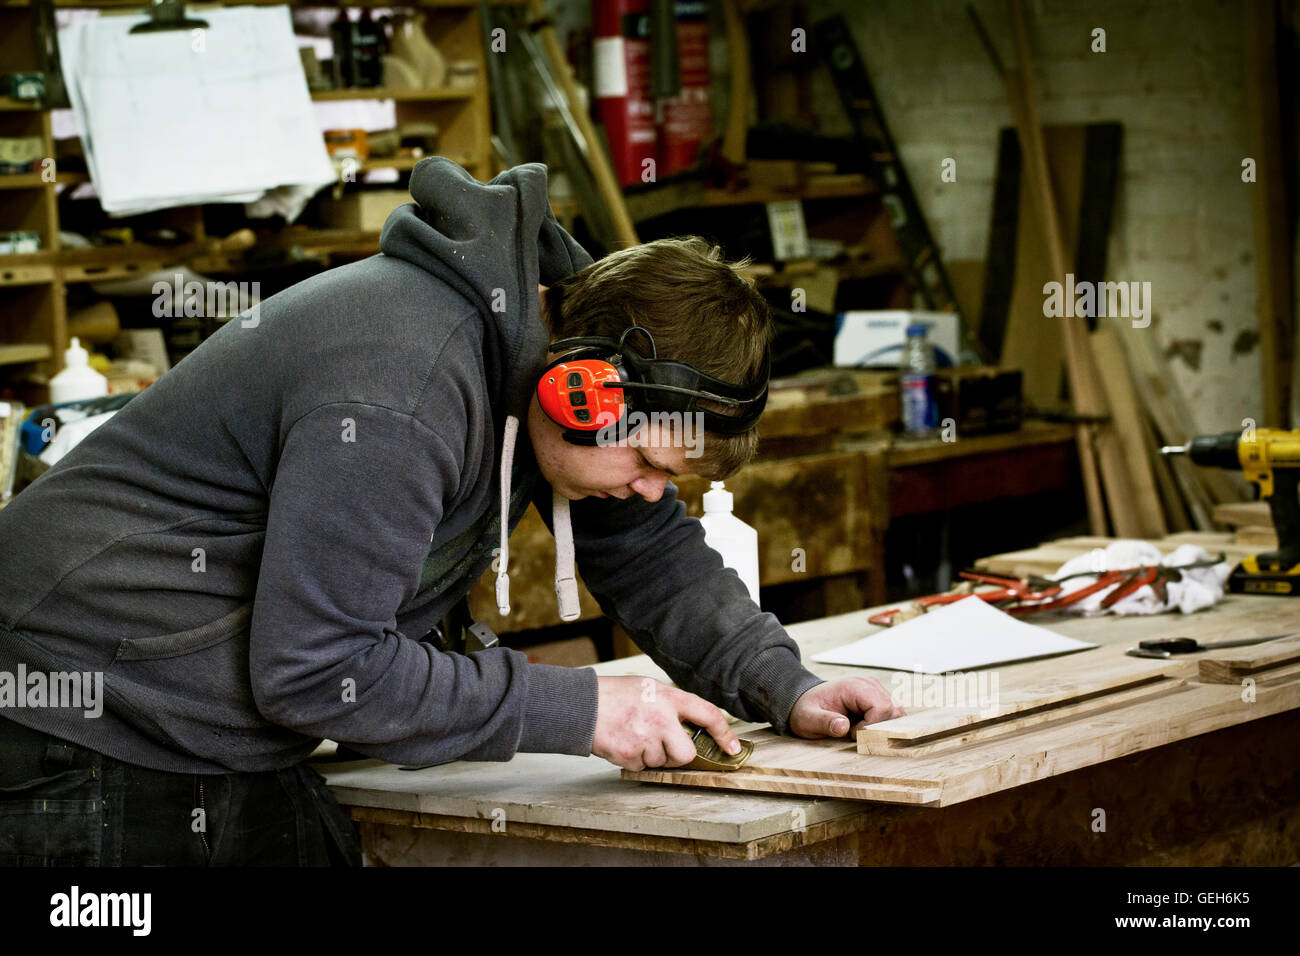 A man working in a furniture maker's workshop wearing ear defenders and using a sharp chisel on wood. Stock Photo